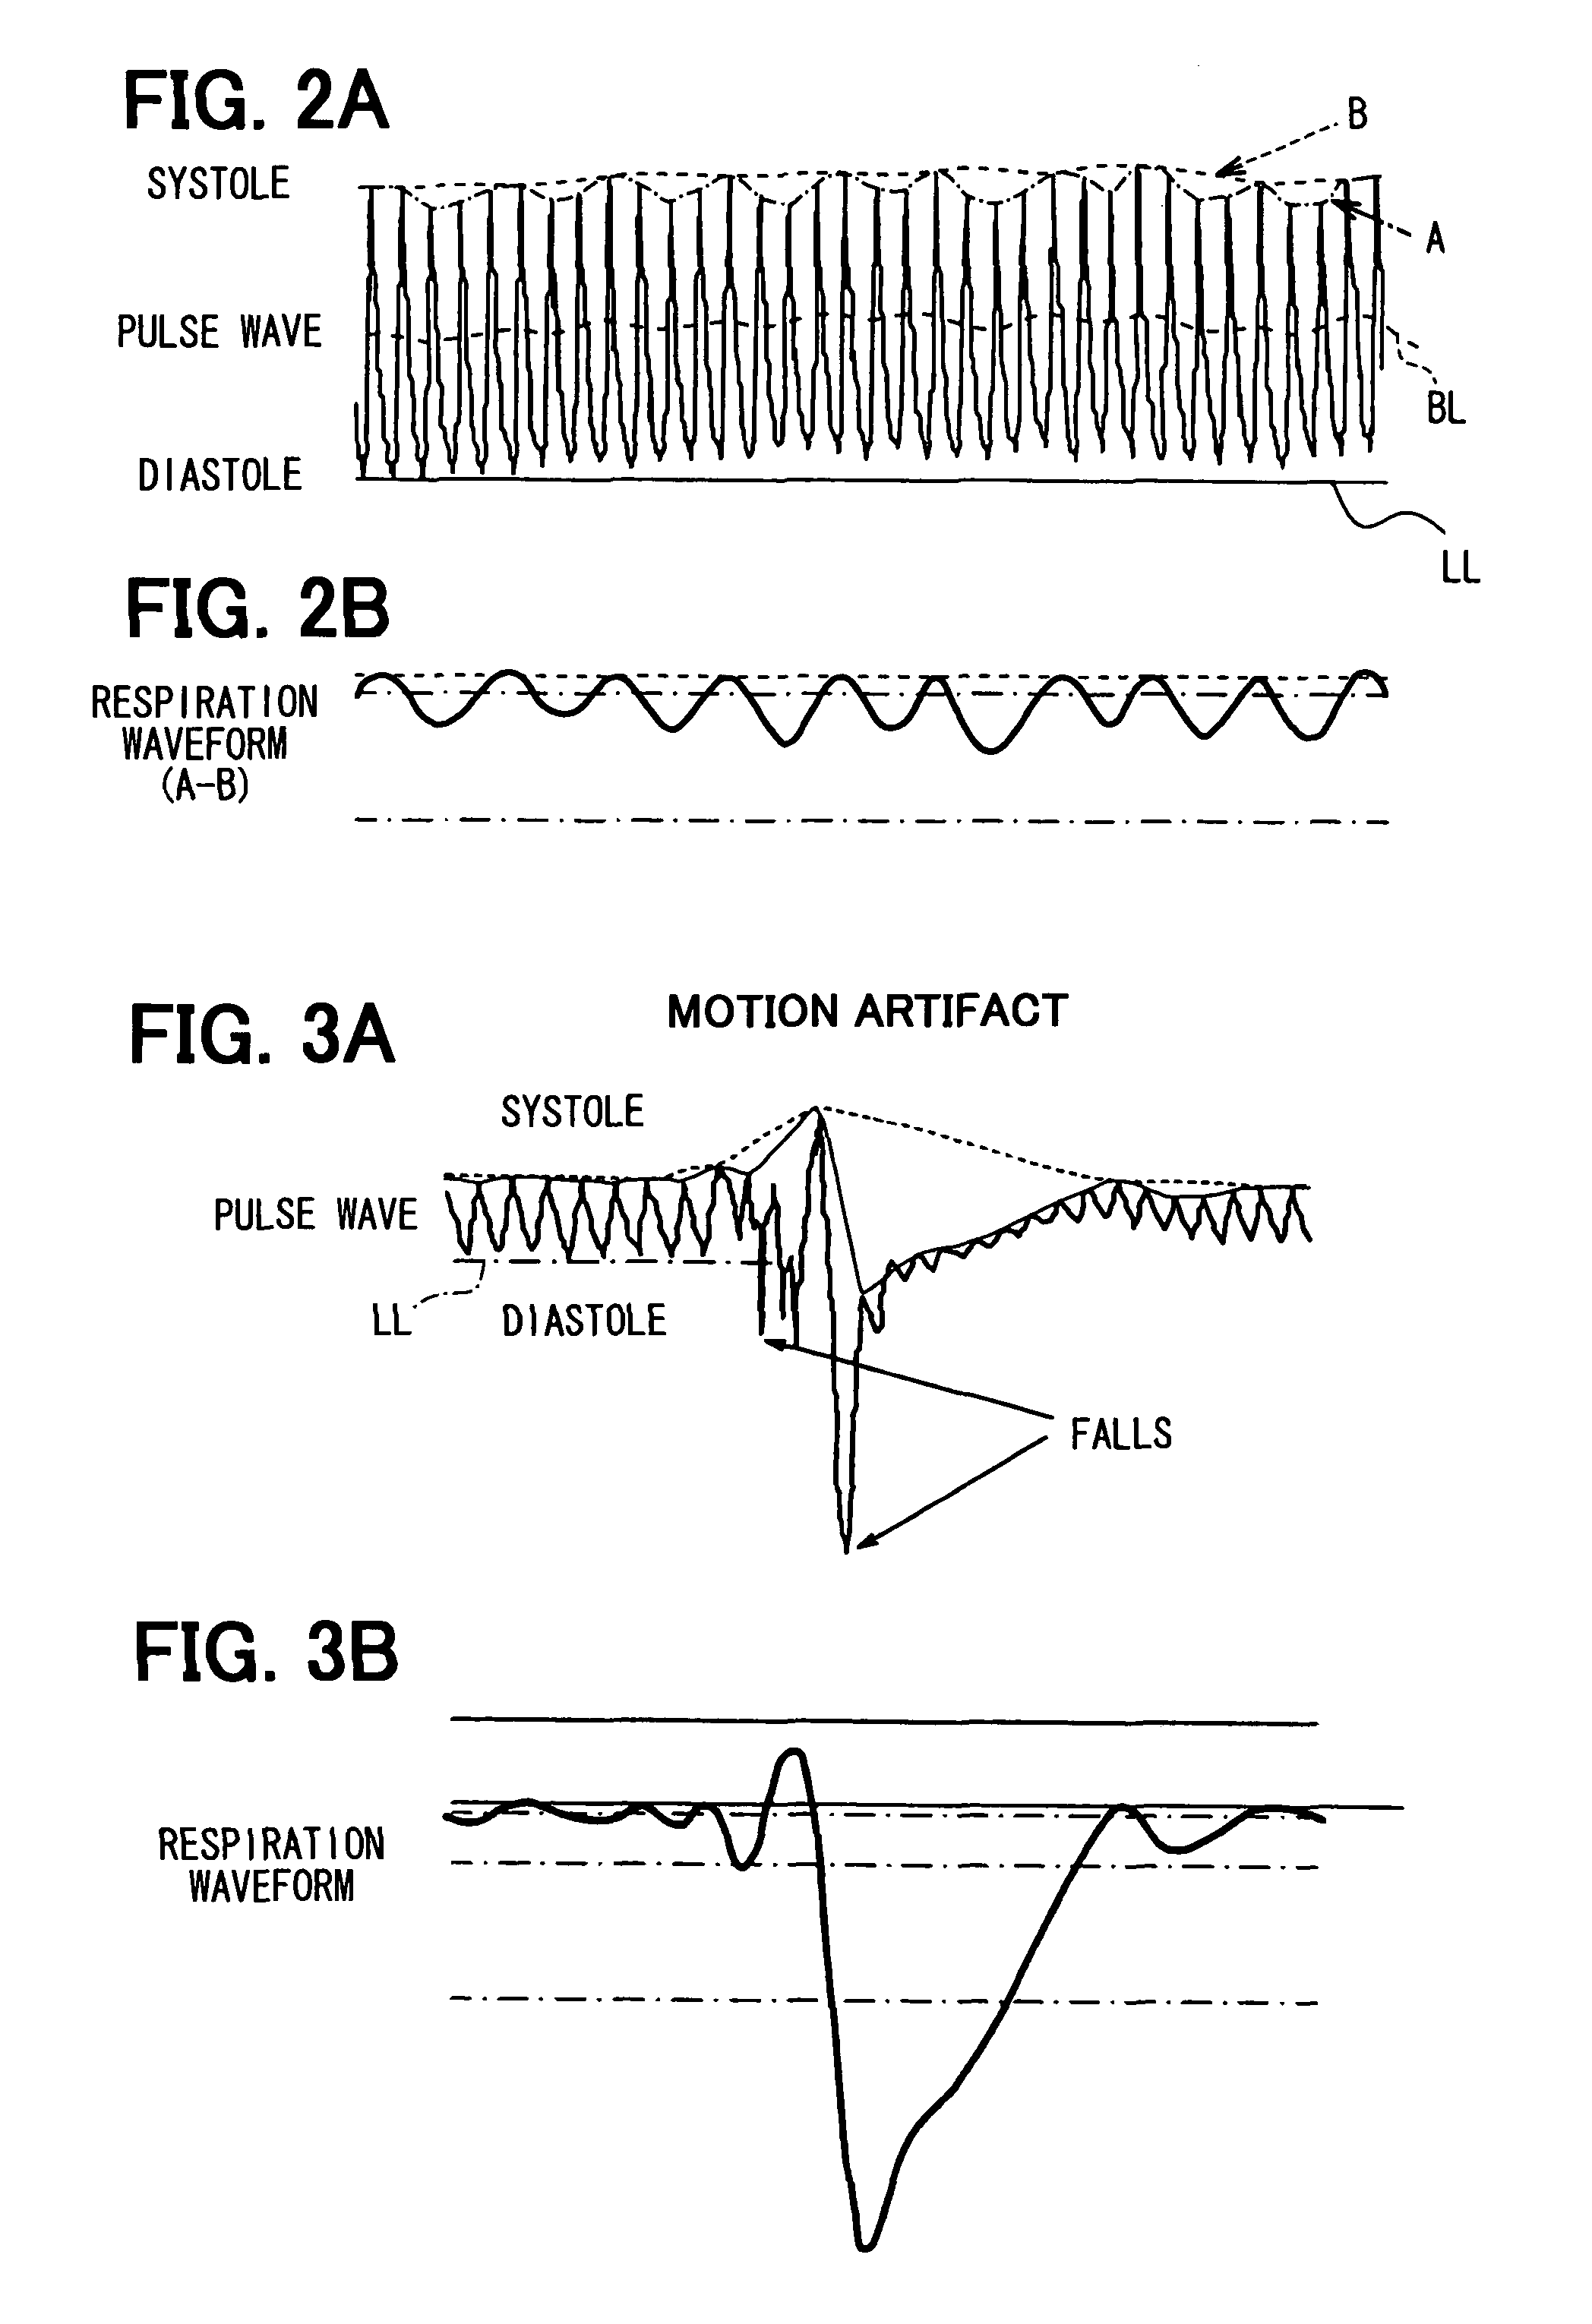 Apparatus for detecting vital functions, control unit and pulse wave sensor